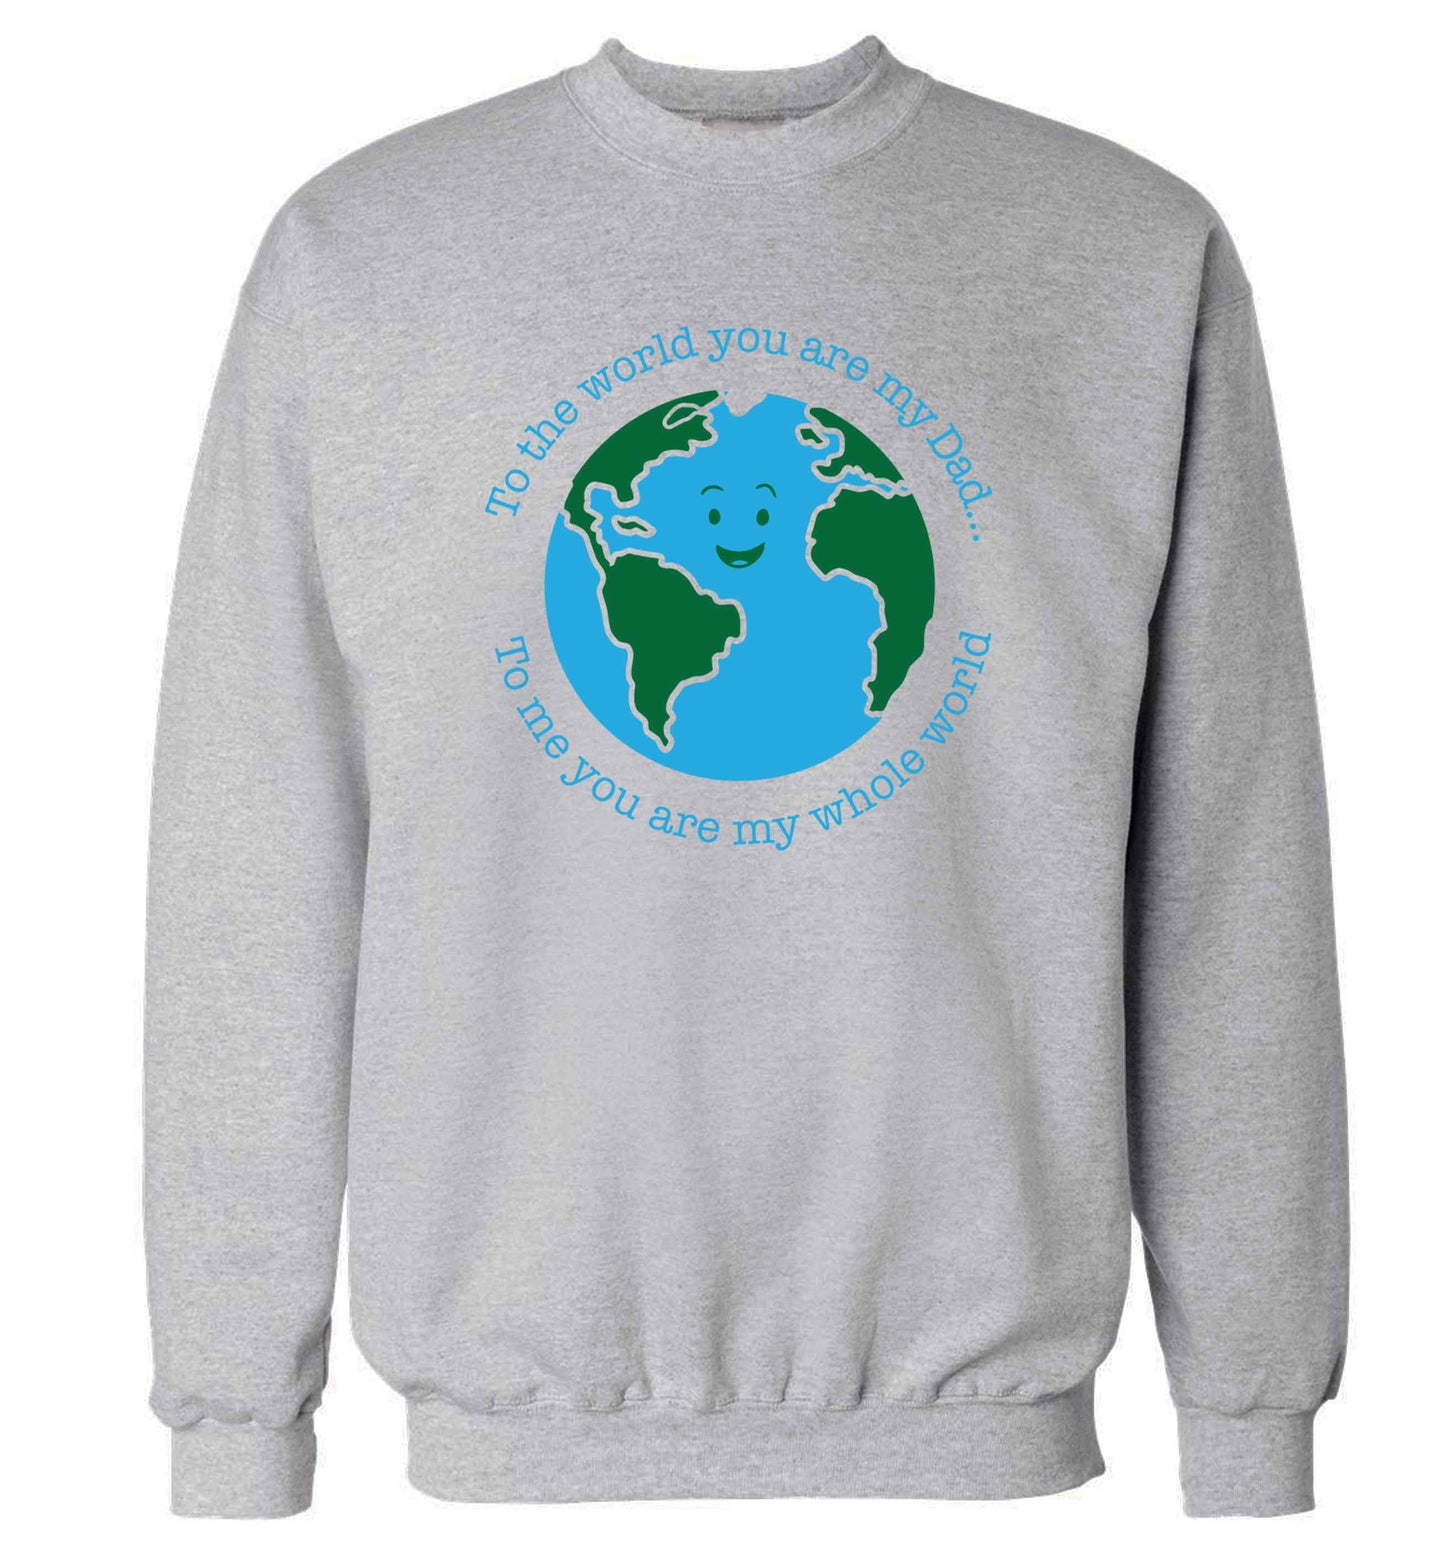 To the world you are my dad, to me you are my whole world adult's unisex grey sweater 2XL